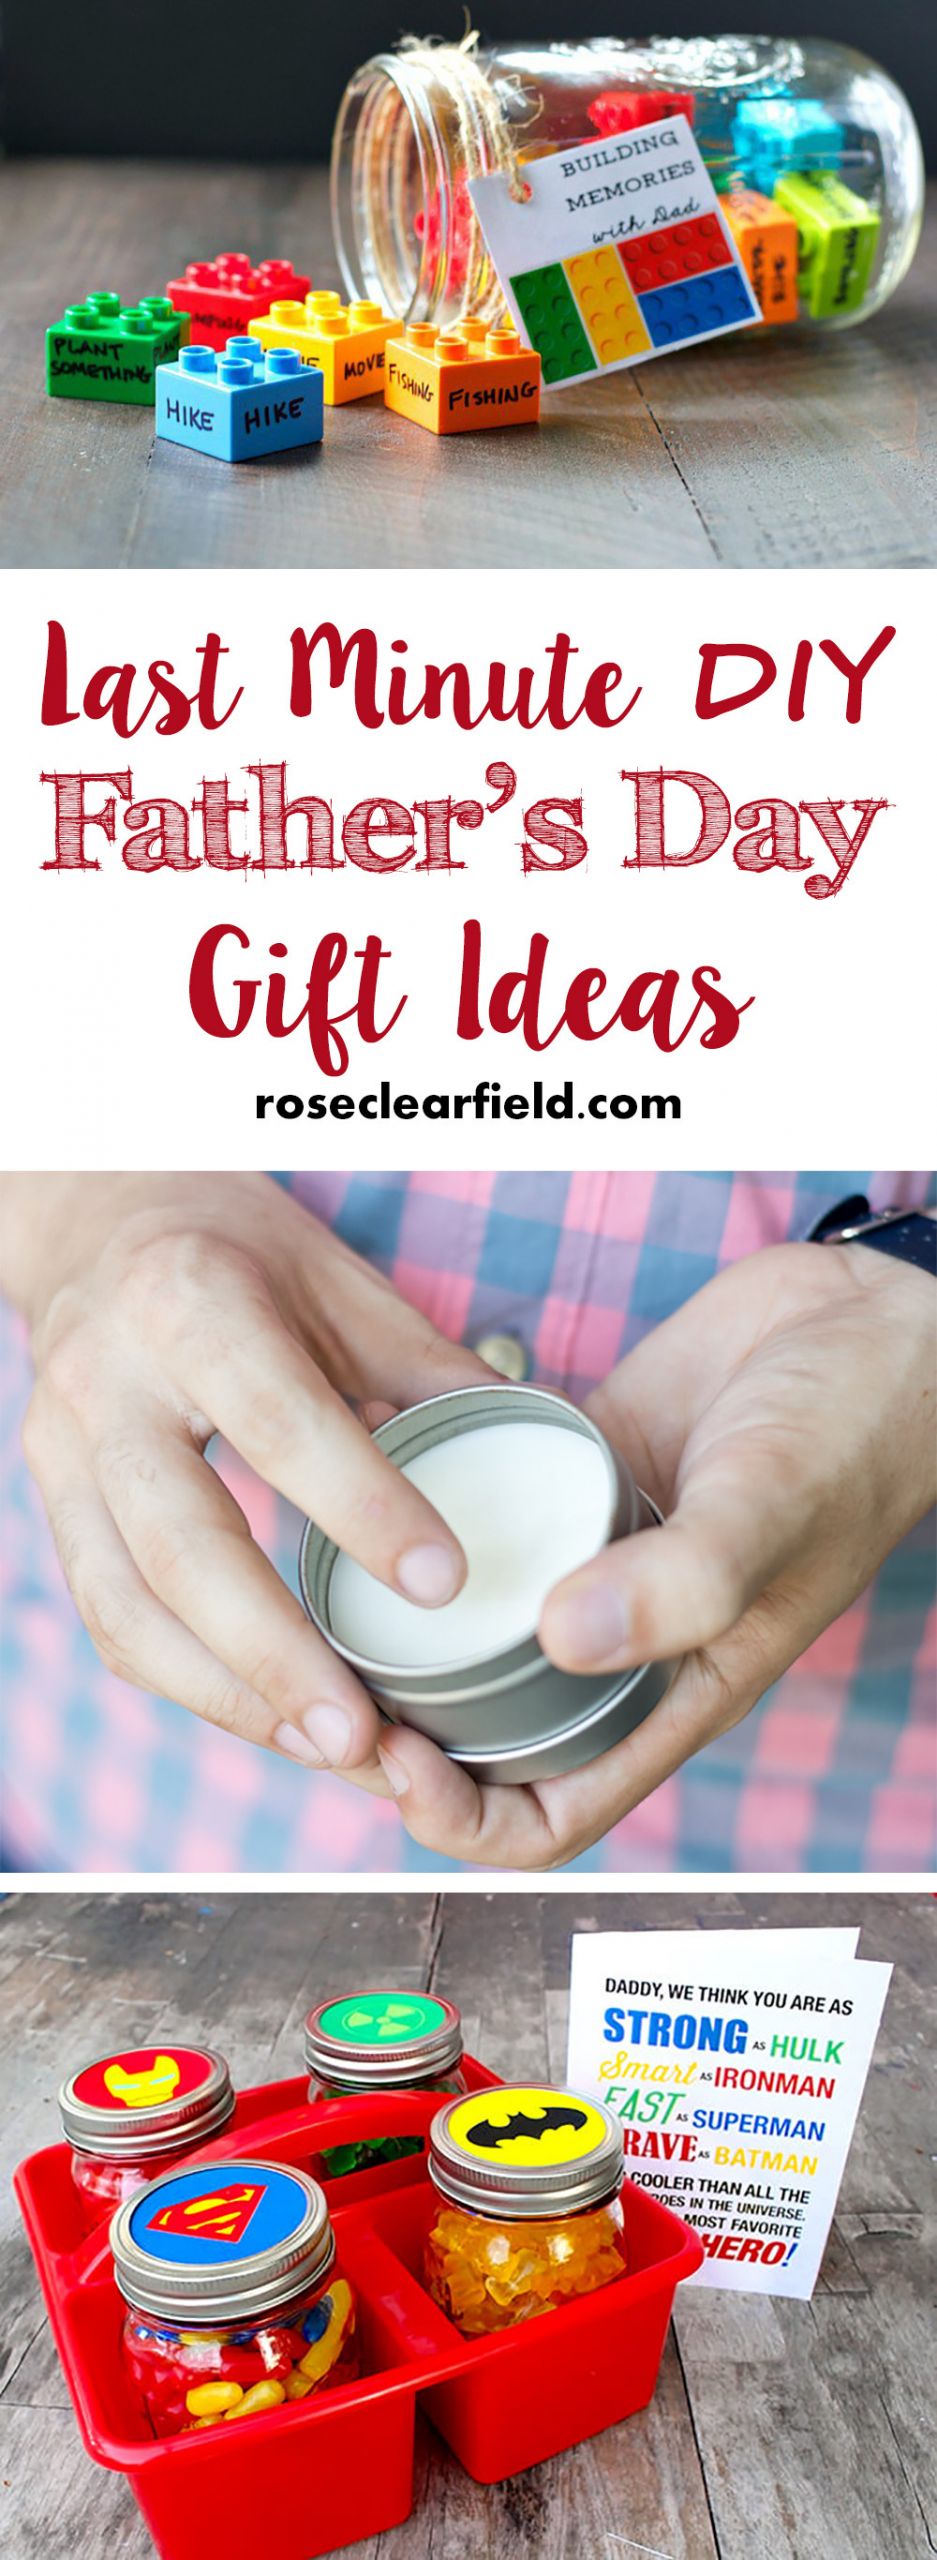 DIY Last Minute Father'S Day Gifts
 Last Minute DIY Father s Day Gift Ideas • Rose Clearfield